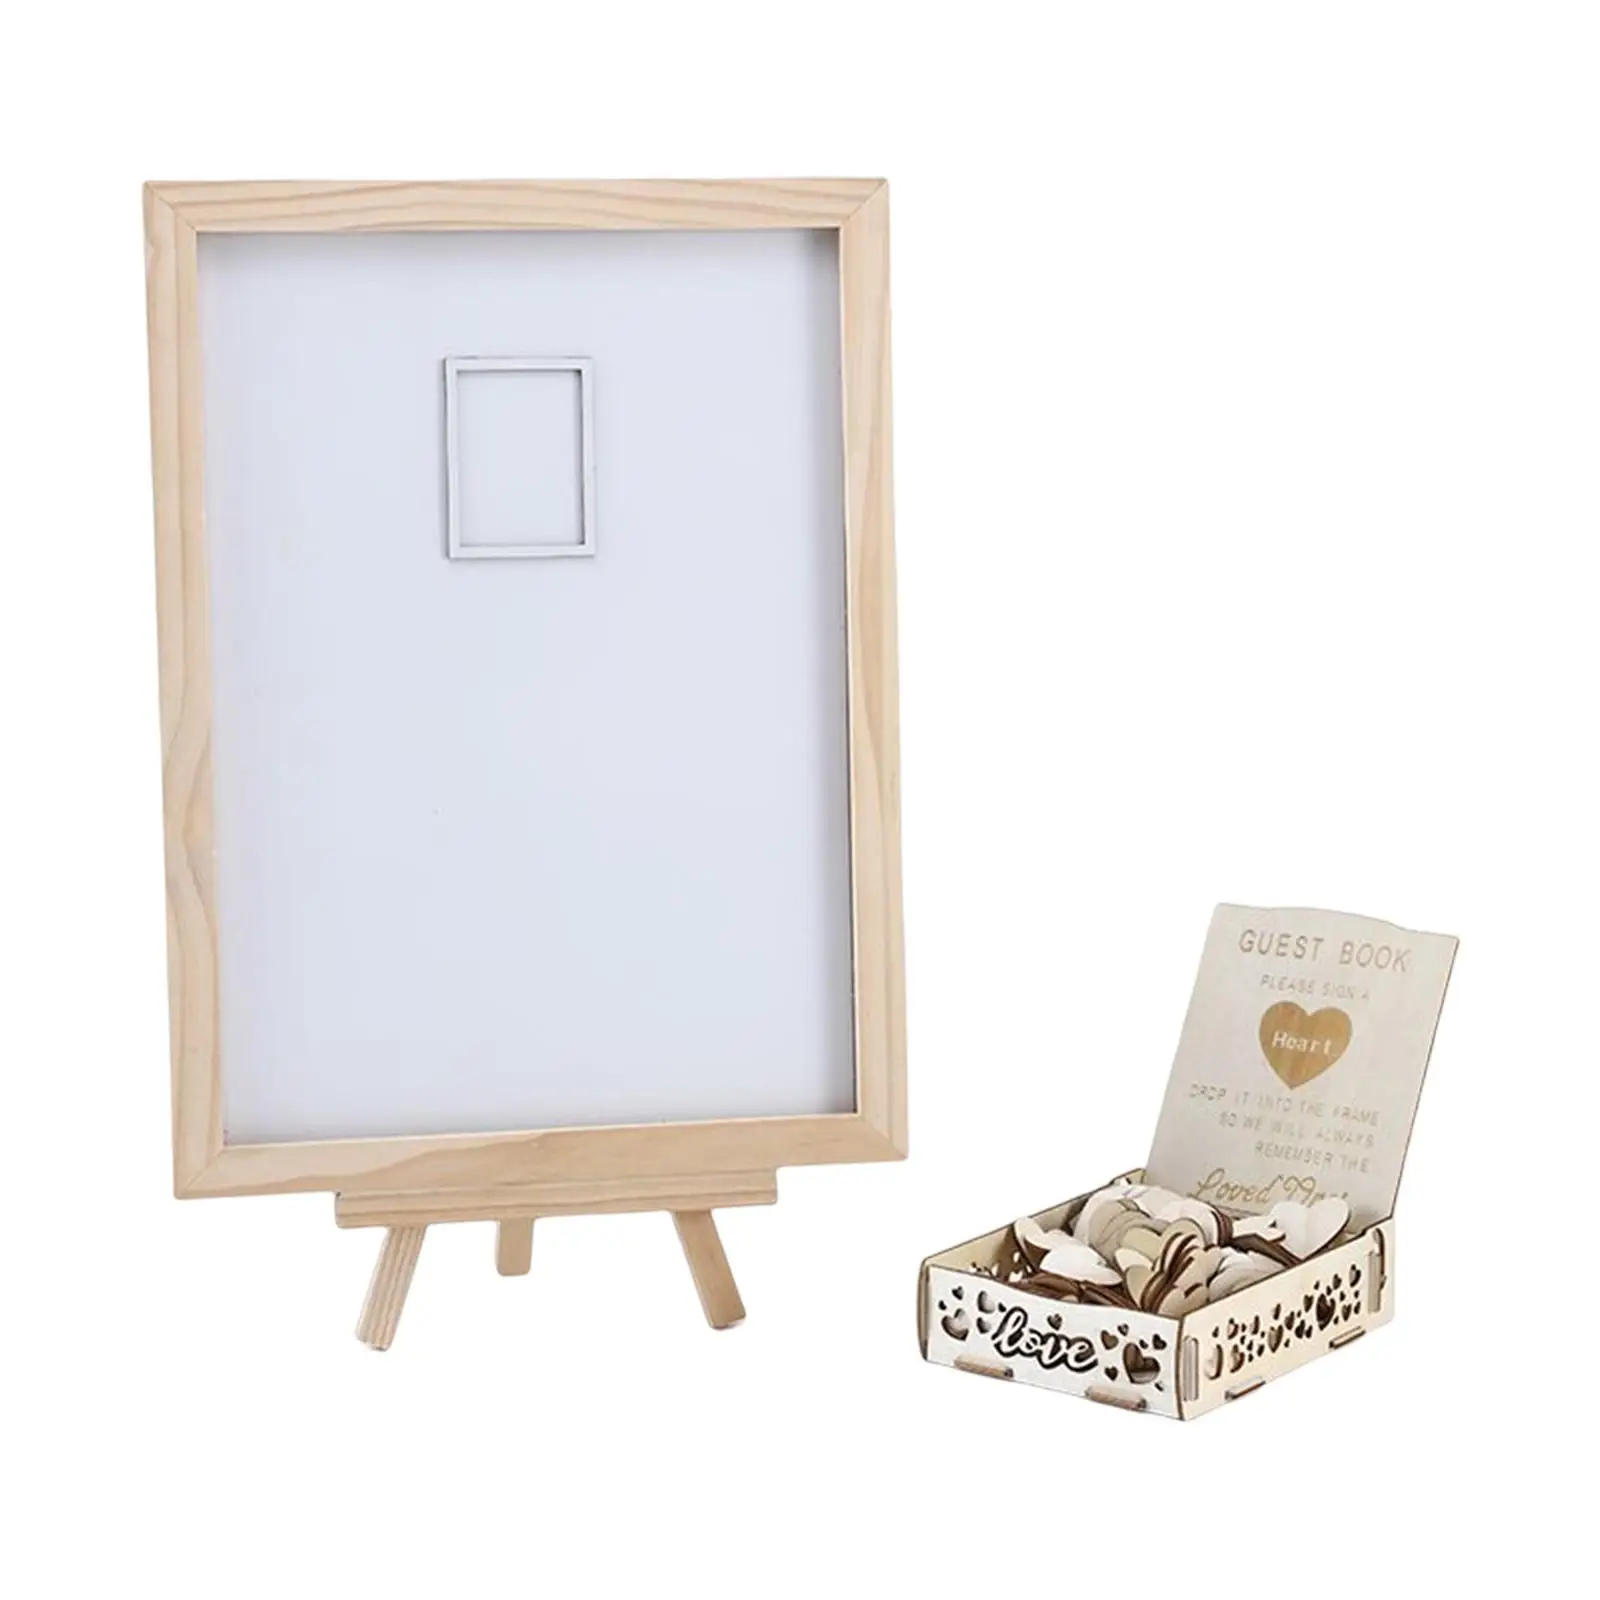 Creative Wedding Guest Book Drop Box Guestbook for Reception Decoration